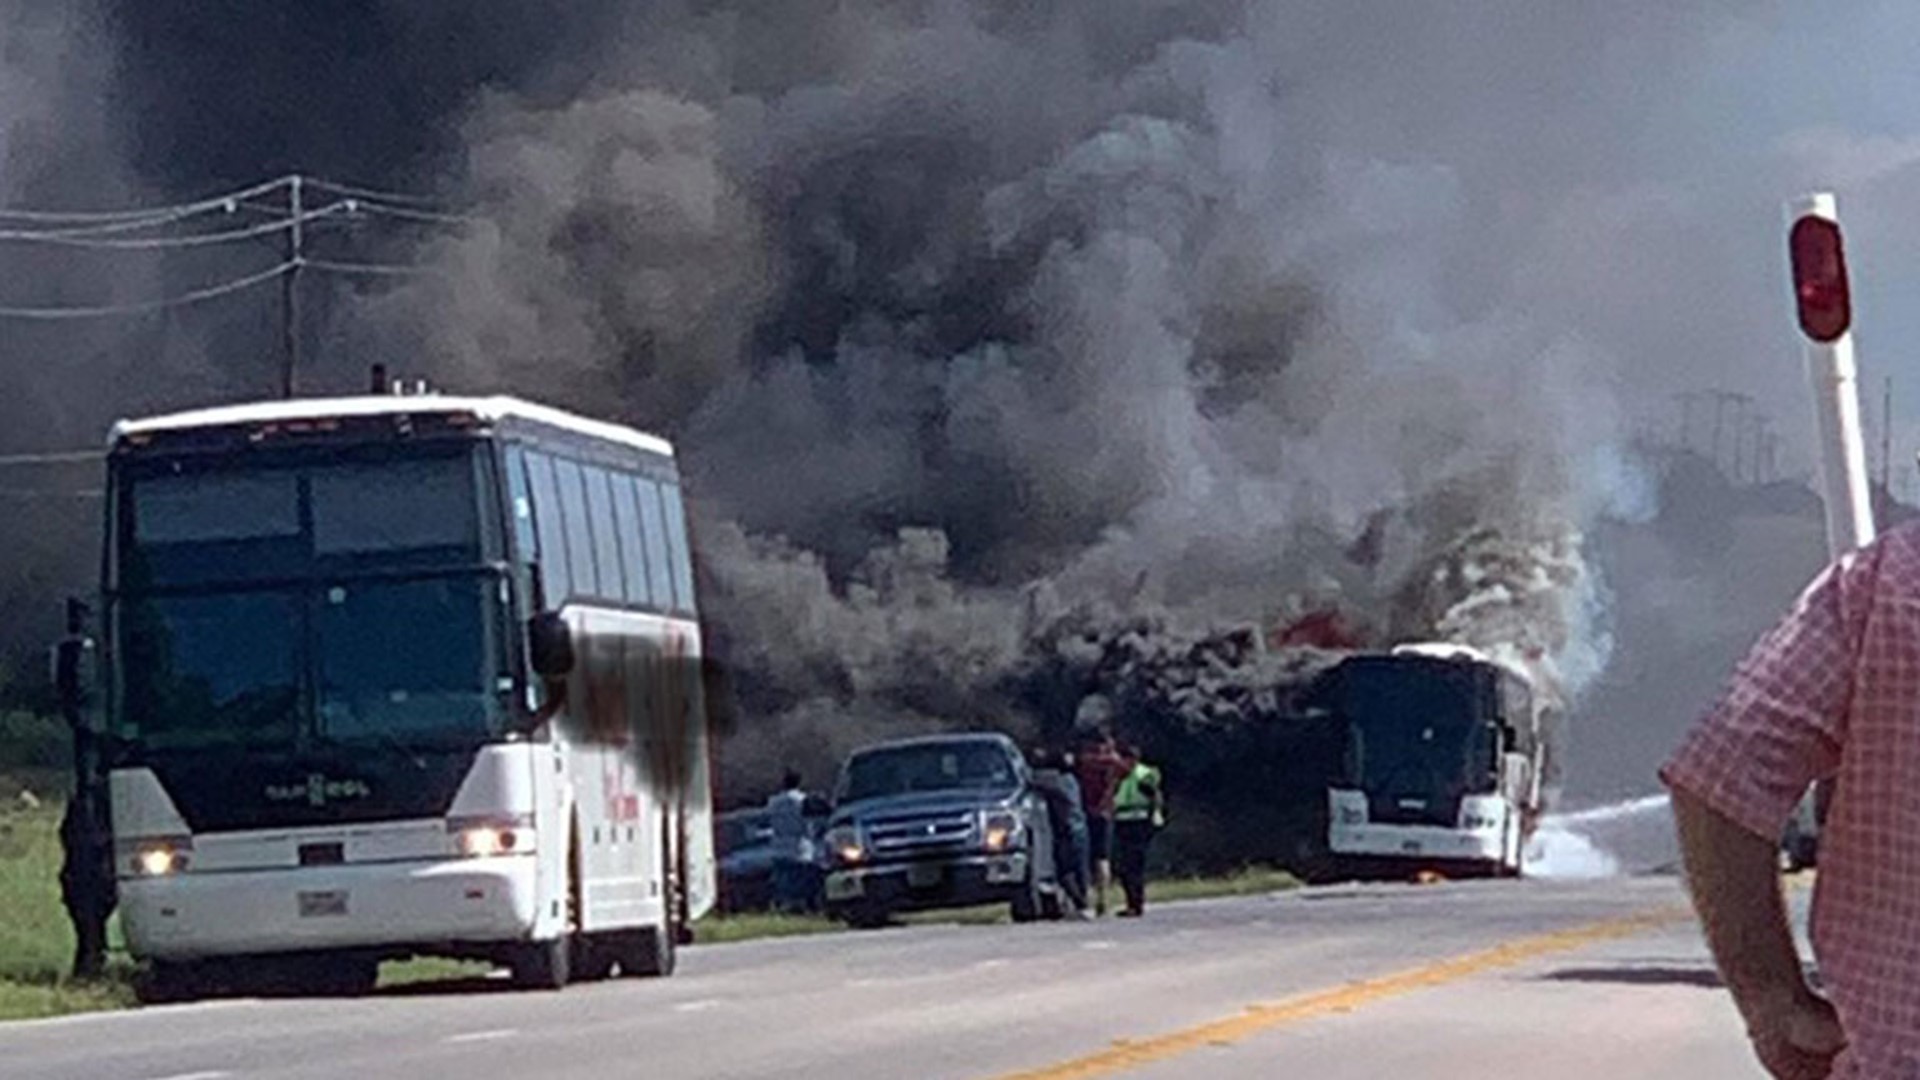 A charter bus reportedly caught on fire Thursday afternoon on U.S. Highway 281 in Blanco County.